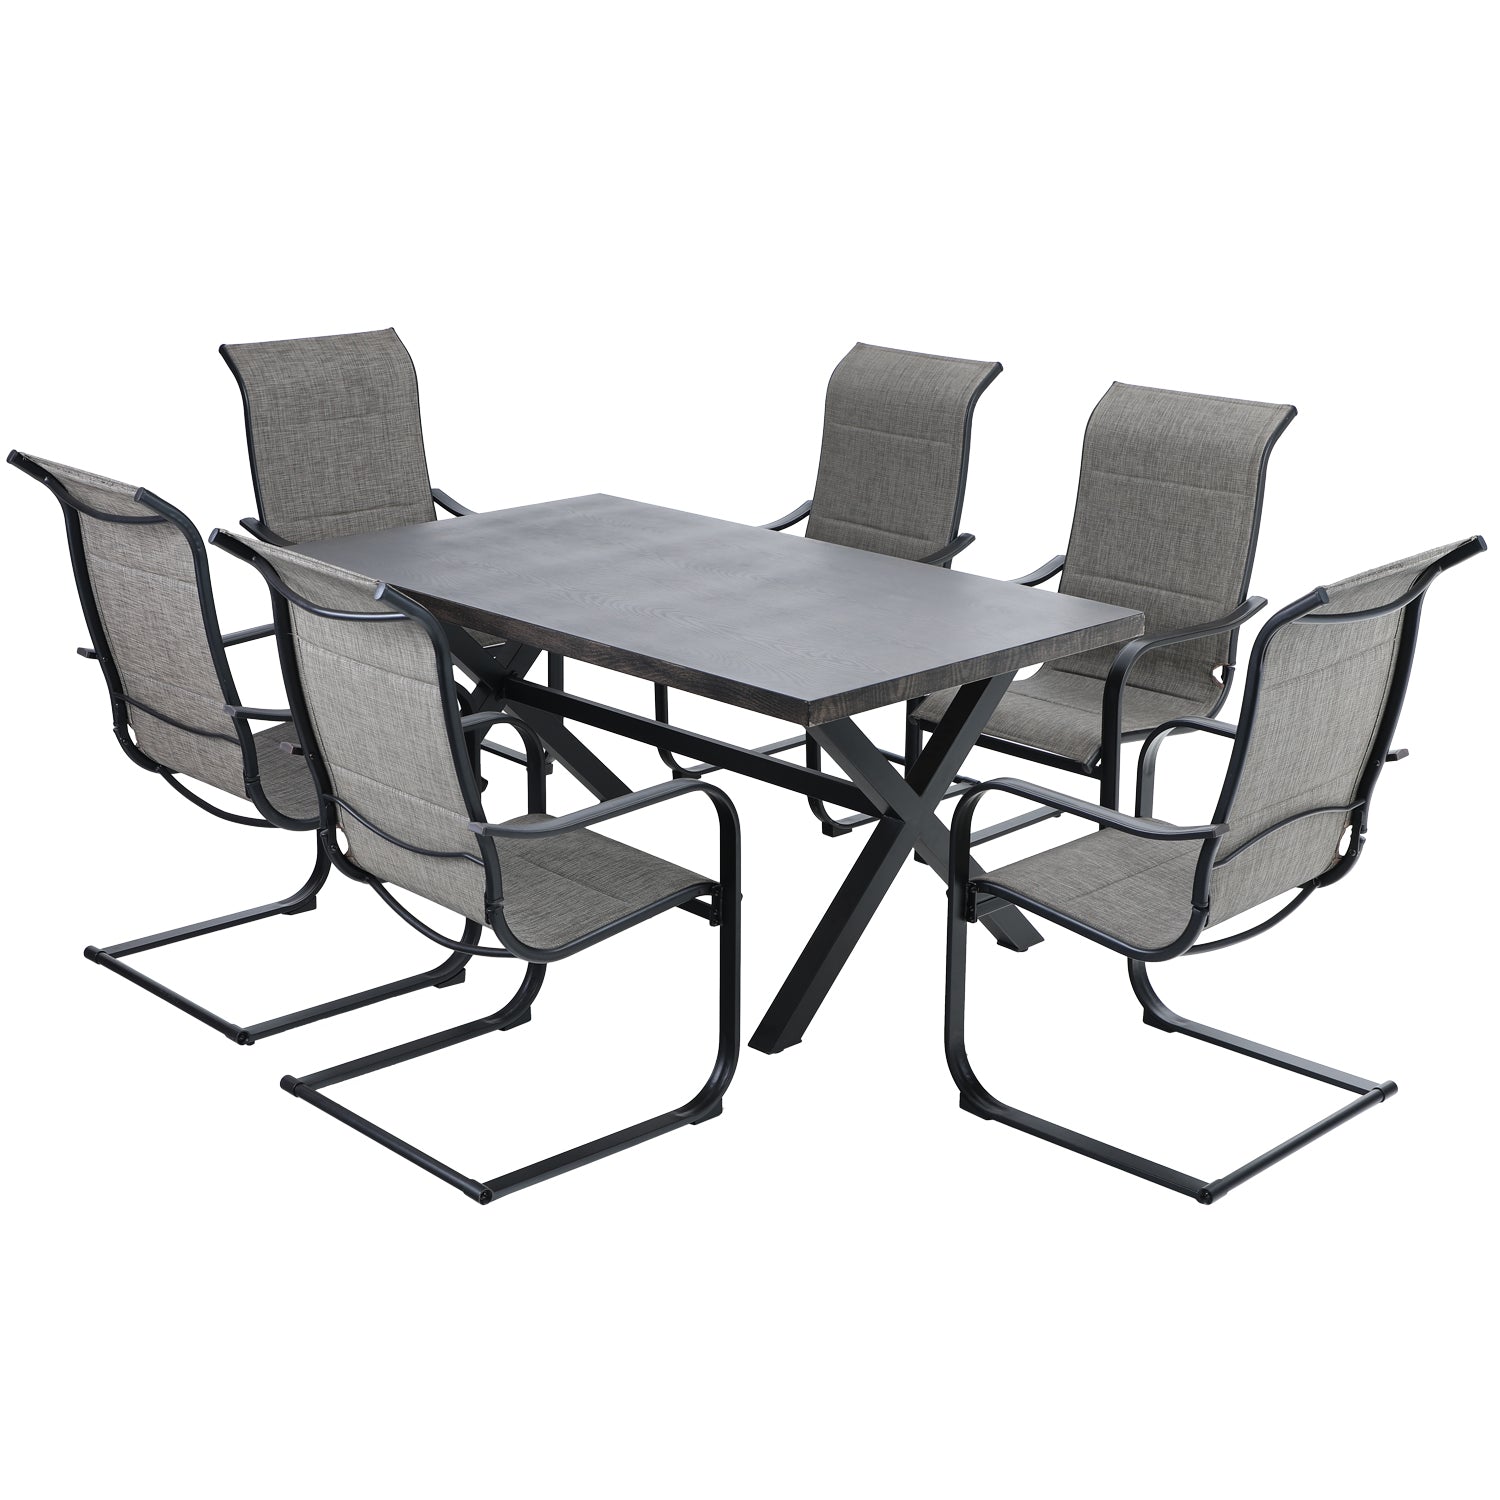 MFSTUDIO Wood Pattern Table & 6 Textilene C-Spring Chairs 7-Piece Patio Dining Set